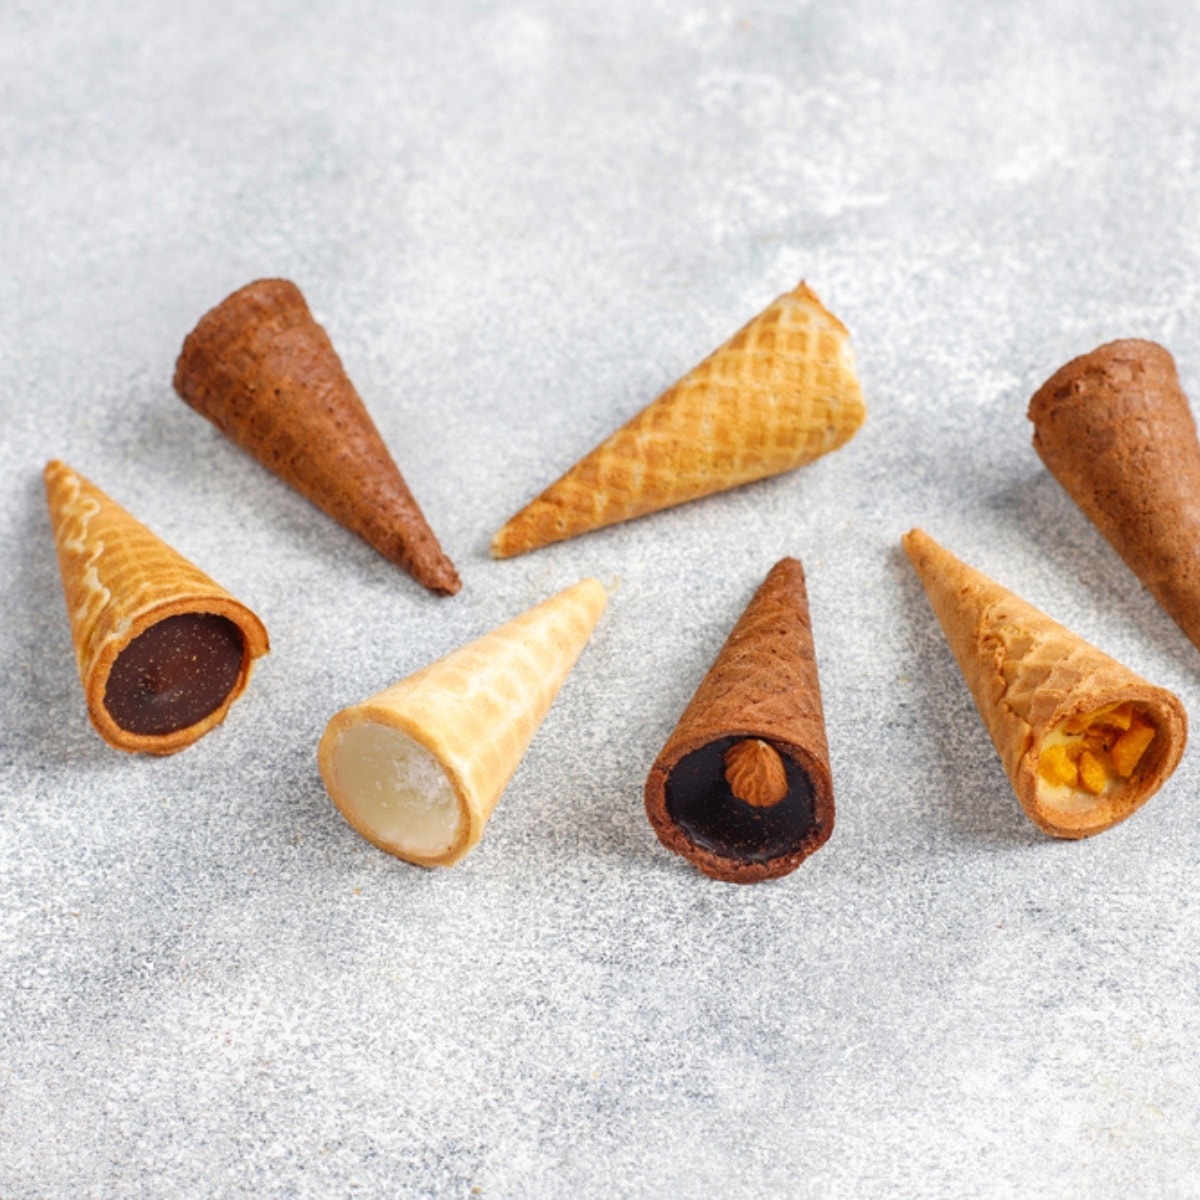 Mini Waffle Cones Filled With Chocolate And Nuts